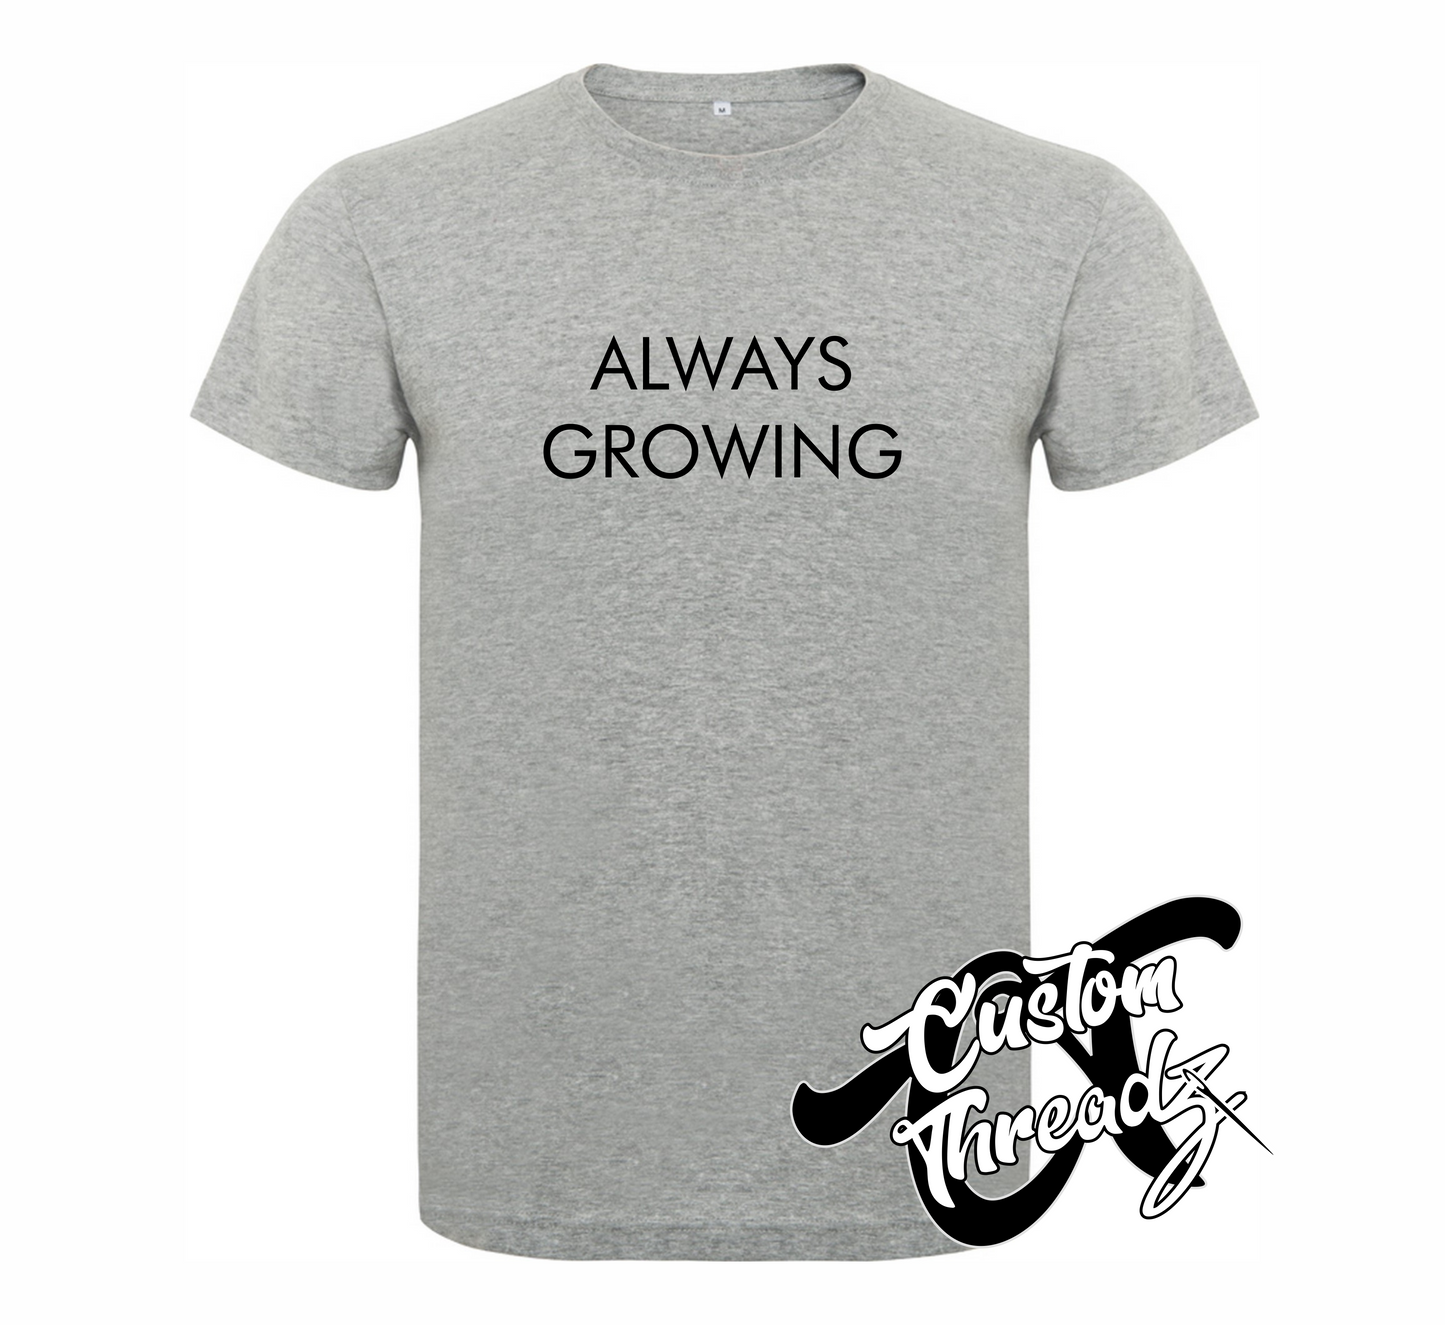 athletic heather grey tee with always growing the infamous collection DTG printed design